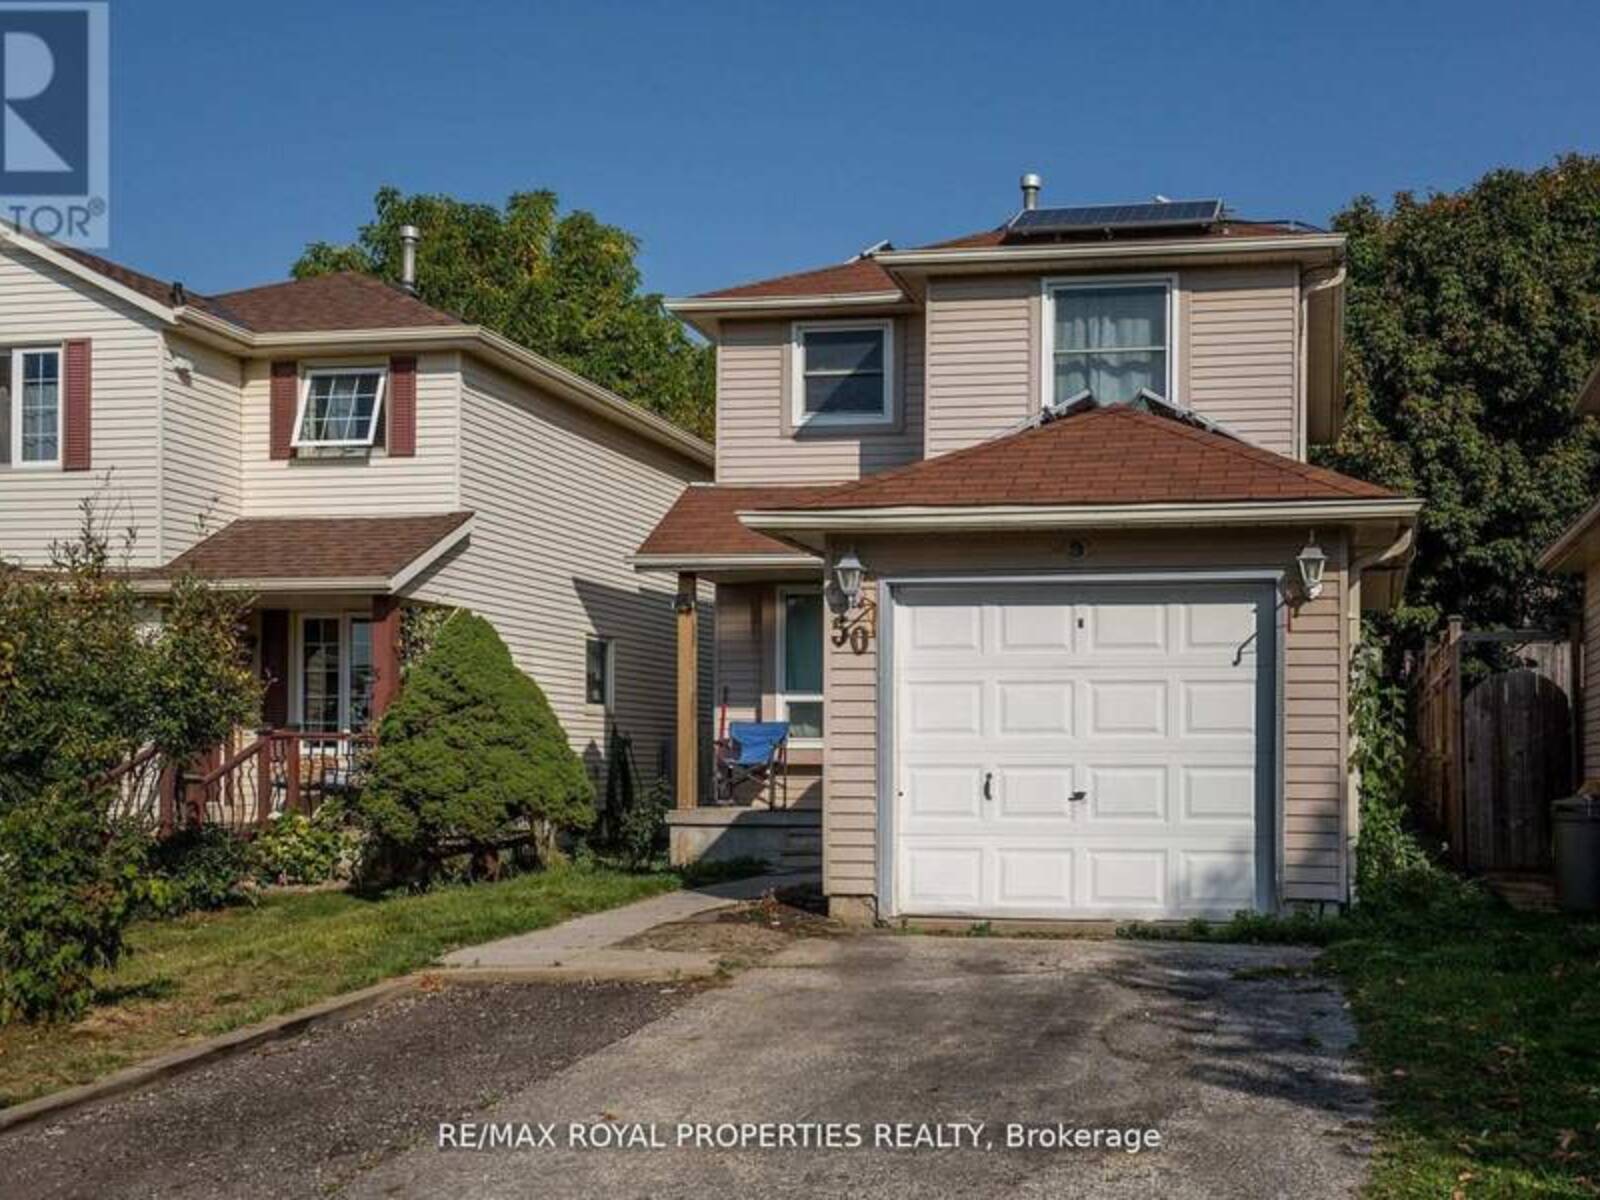 50 PATTON ROAD, Barrie, Ontario L4N 6V5